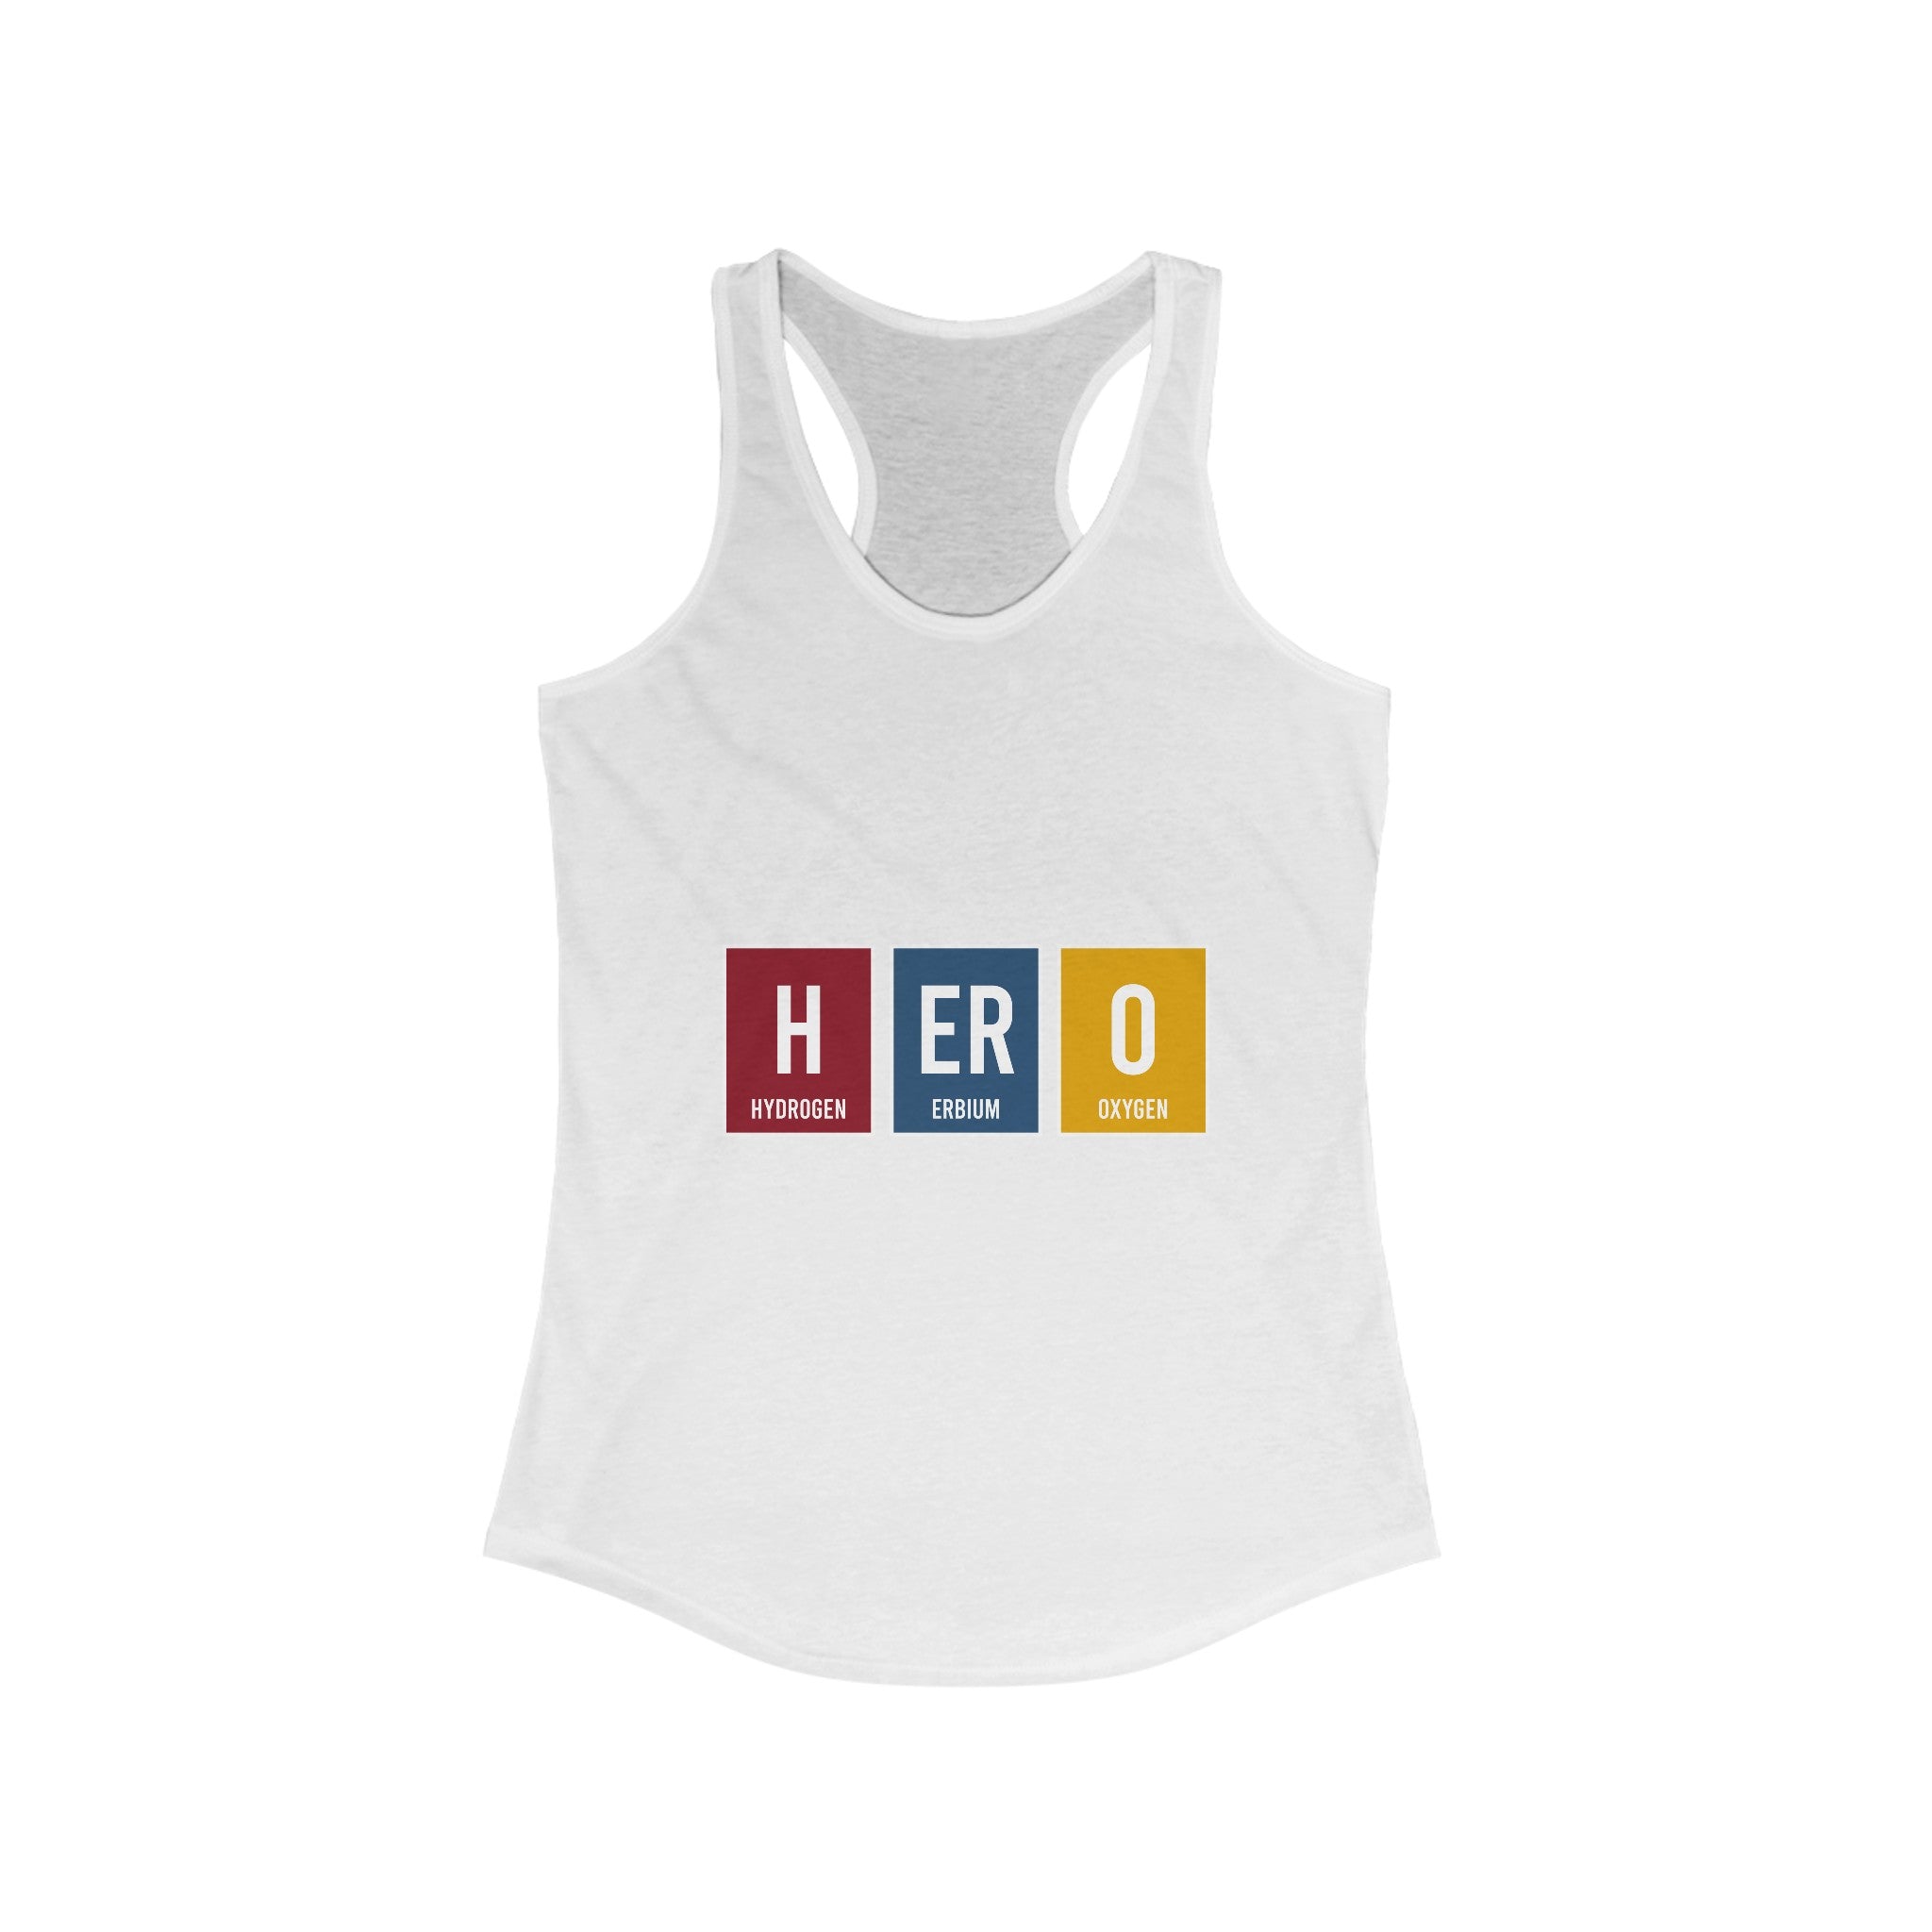 Lightweight HERO - Women's Racerback Tank featuring "HERO" spelled out using periodic table elements: Hydrogen (H), Erbium (Er), and Oxygen (O) each in a colored square, perfect for active lifestyles.